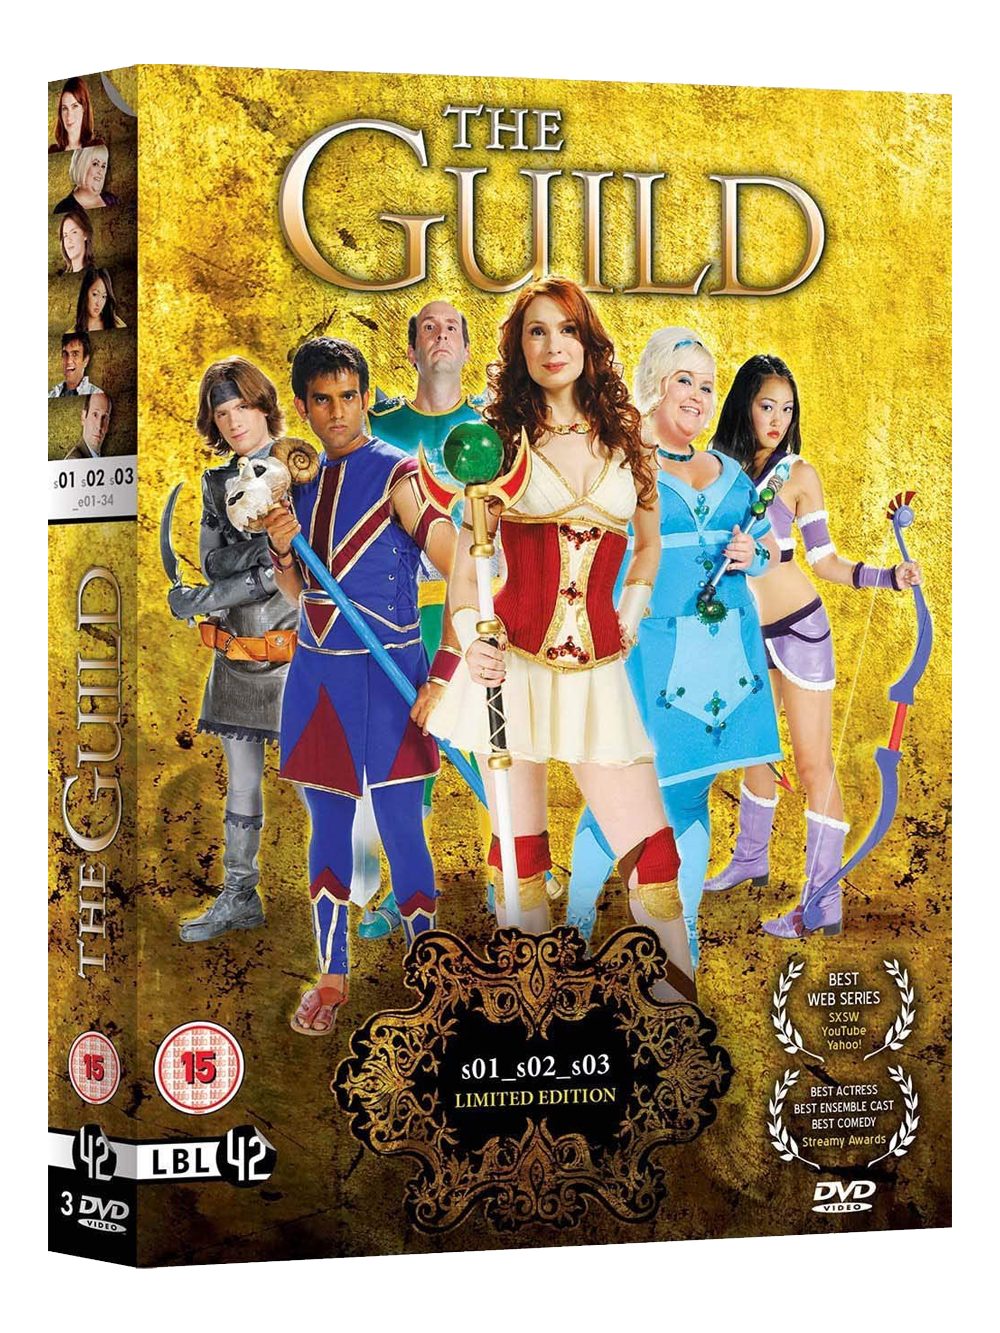 The Guild DVD Box Turn 2.png